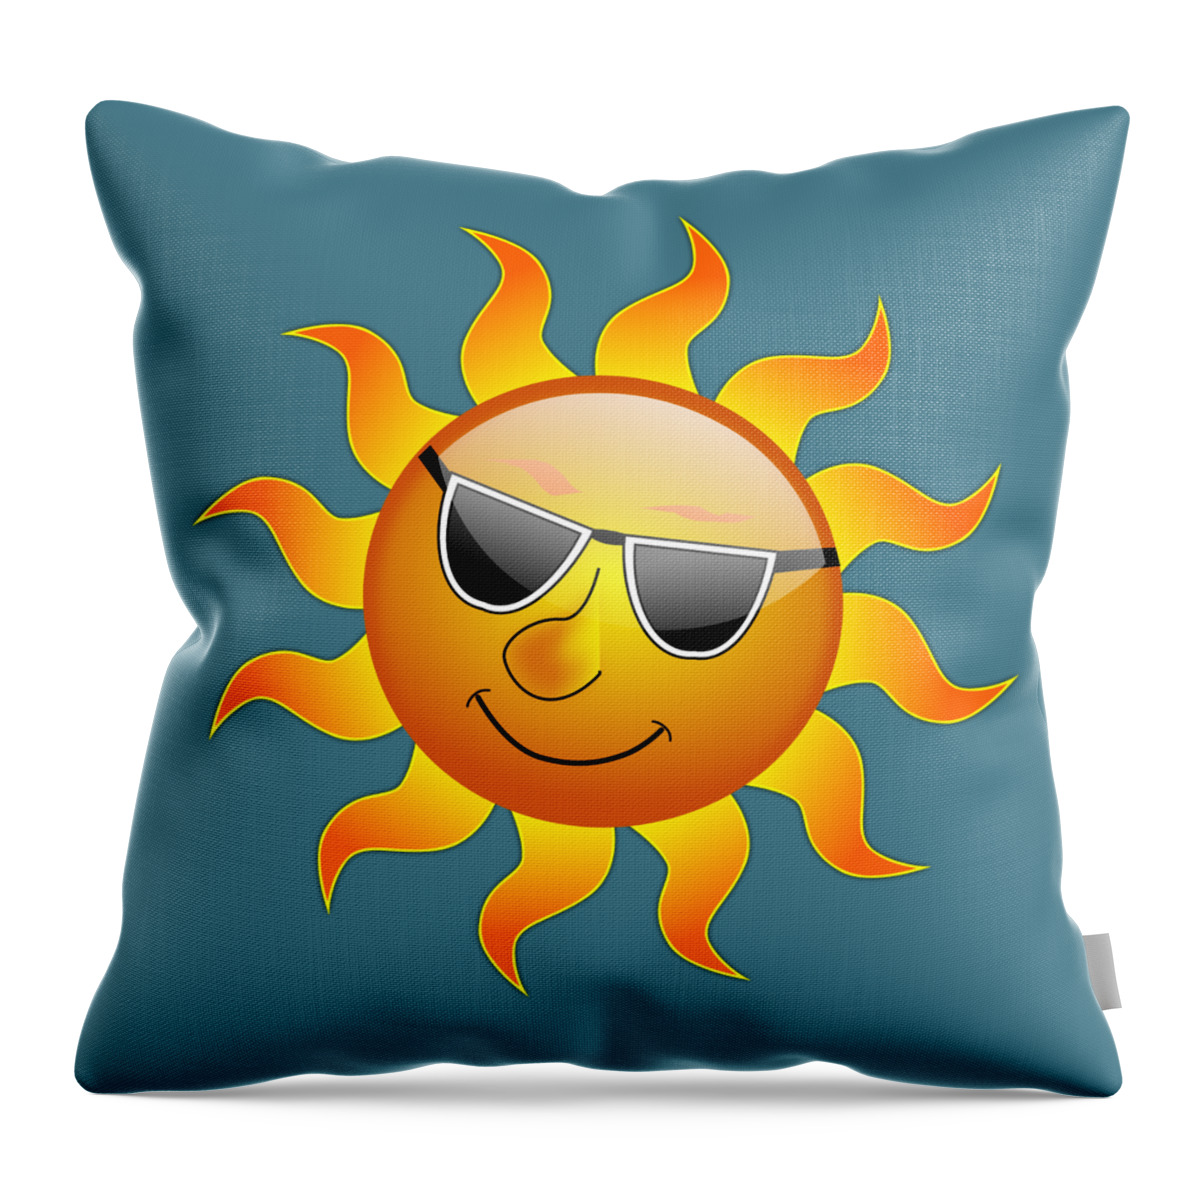 Sunshine Throw Pillow featuring the digital art Sun with sunglasses by Movie Poster Prints